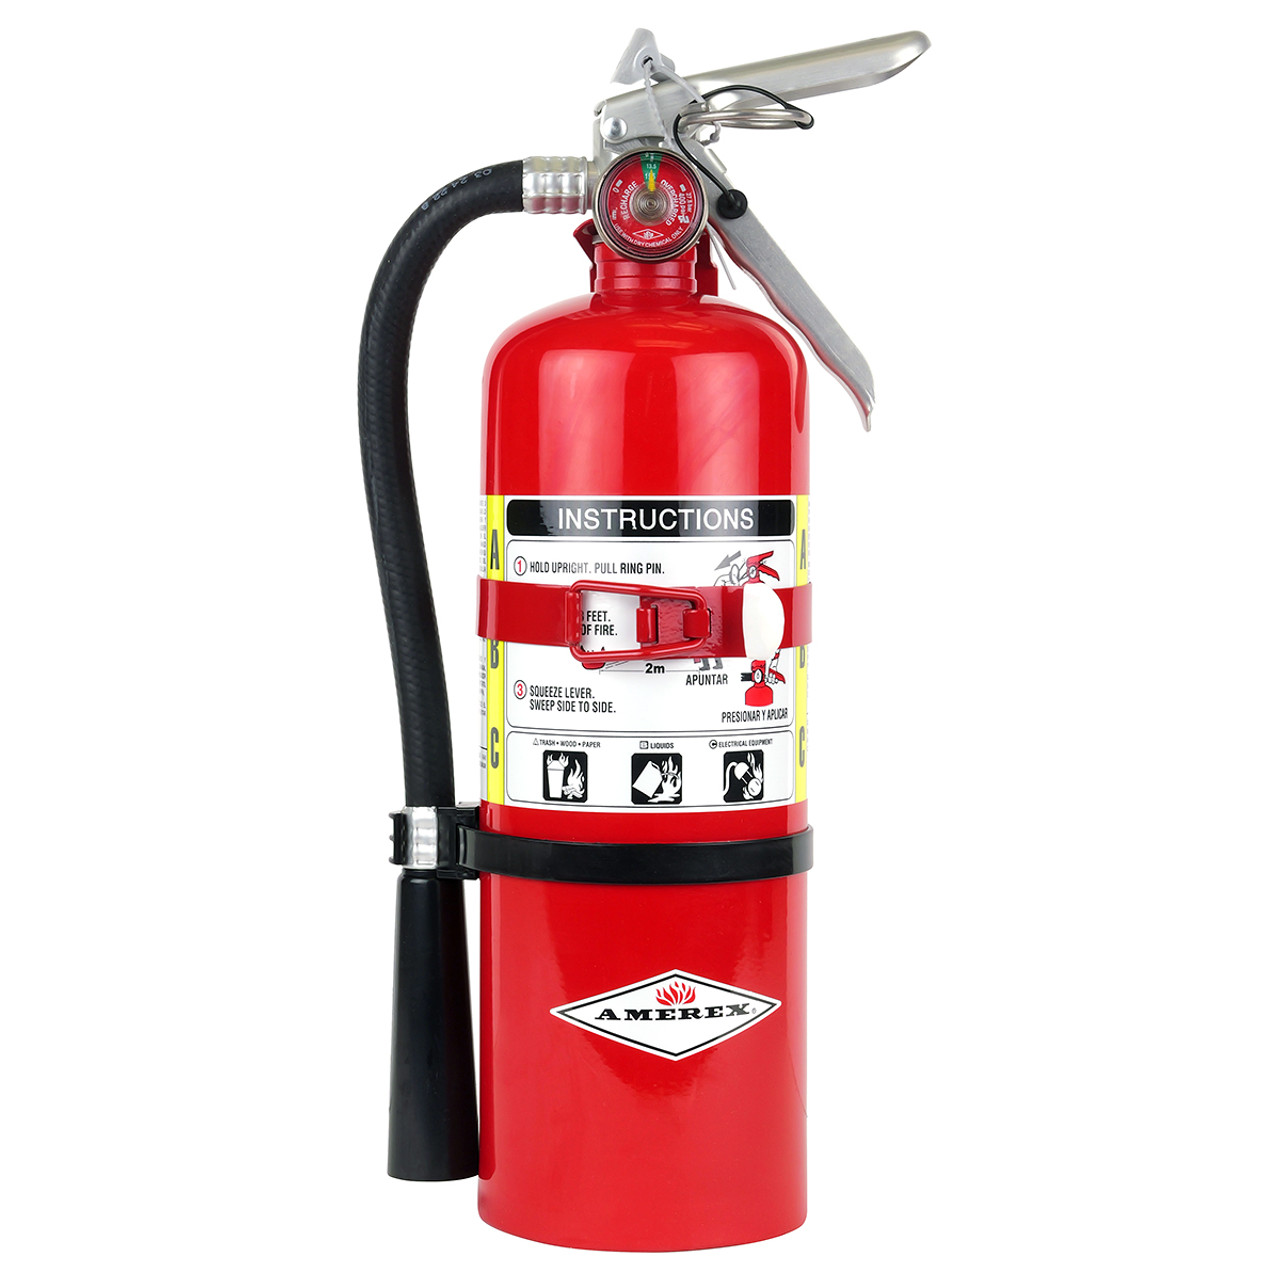 5 lb. ABC Fire Extinguisher - 2A:10B:C - with Vehicle Bracket